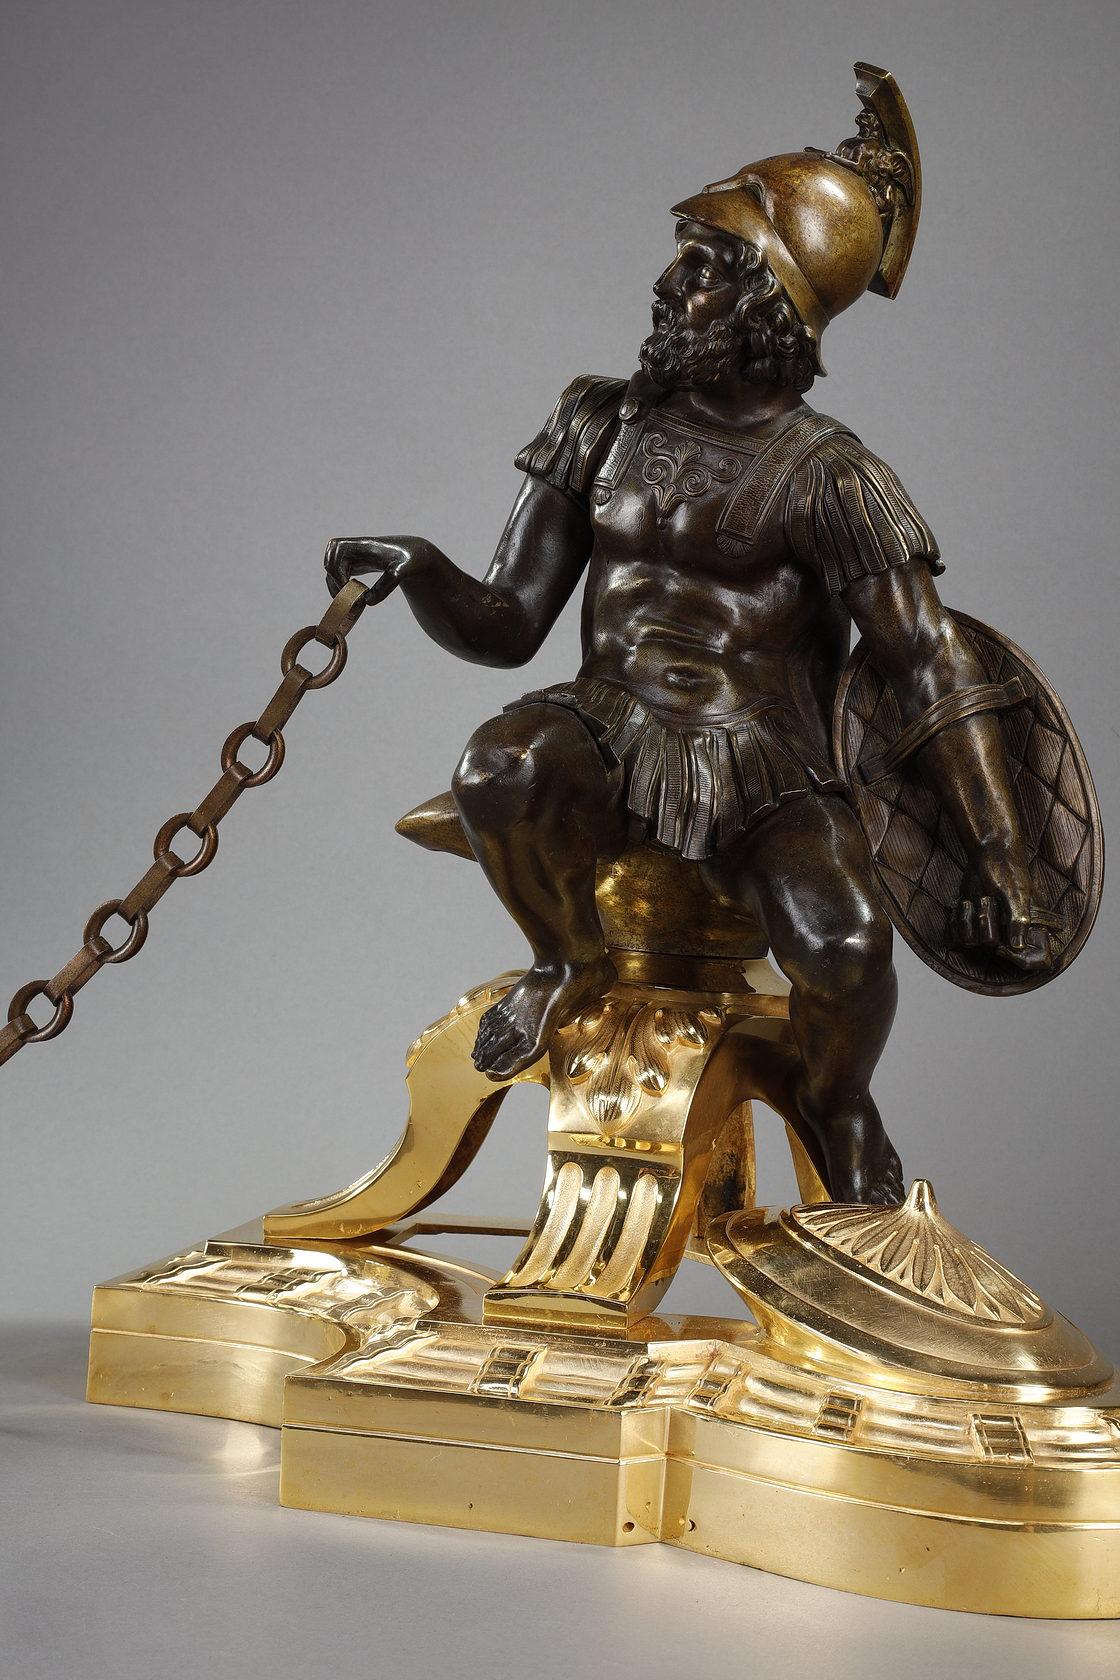 A pair of patinated and gilt bronze andirons representing a soldier and a beggar. One shows a soldier with a Macedonian helmet with a sphinx-shaped crest, a breastplate moulding his shape and holding a shield. The other shows a naked man with a lion